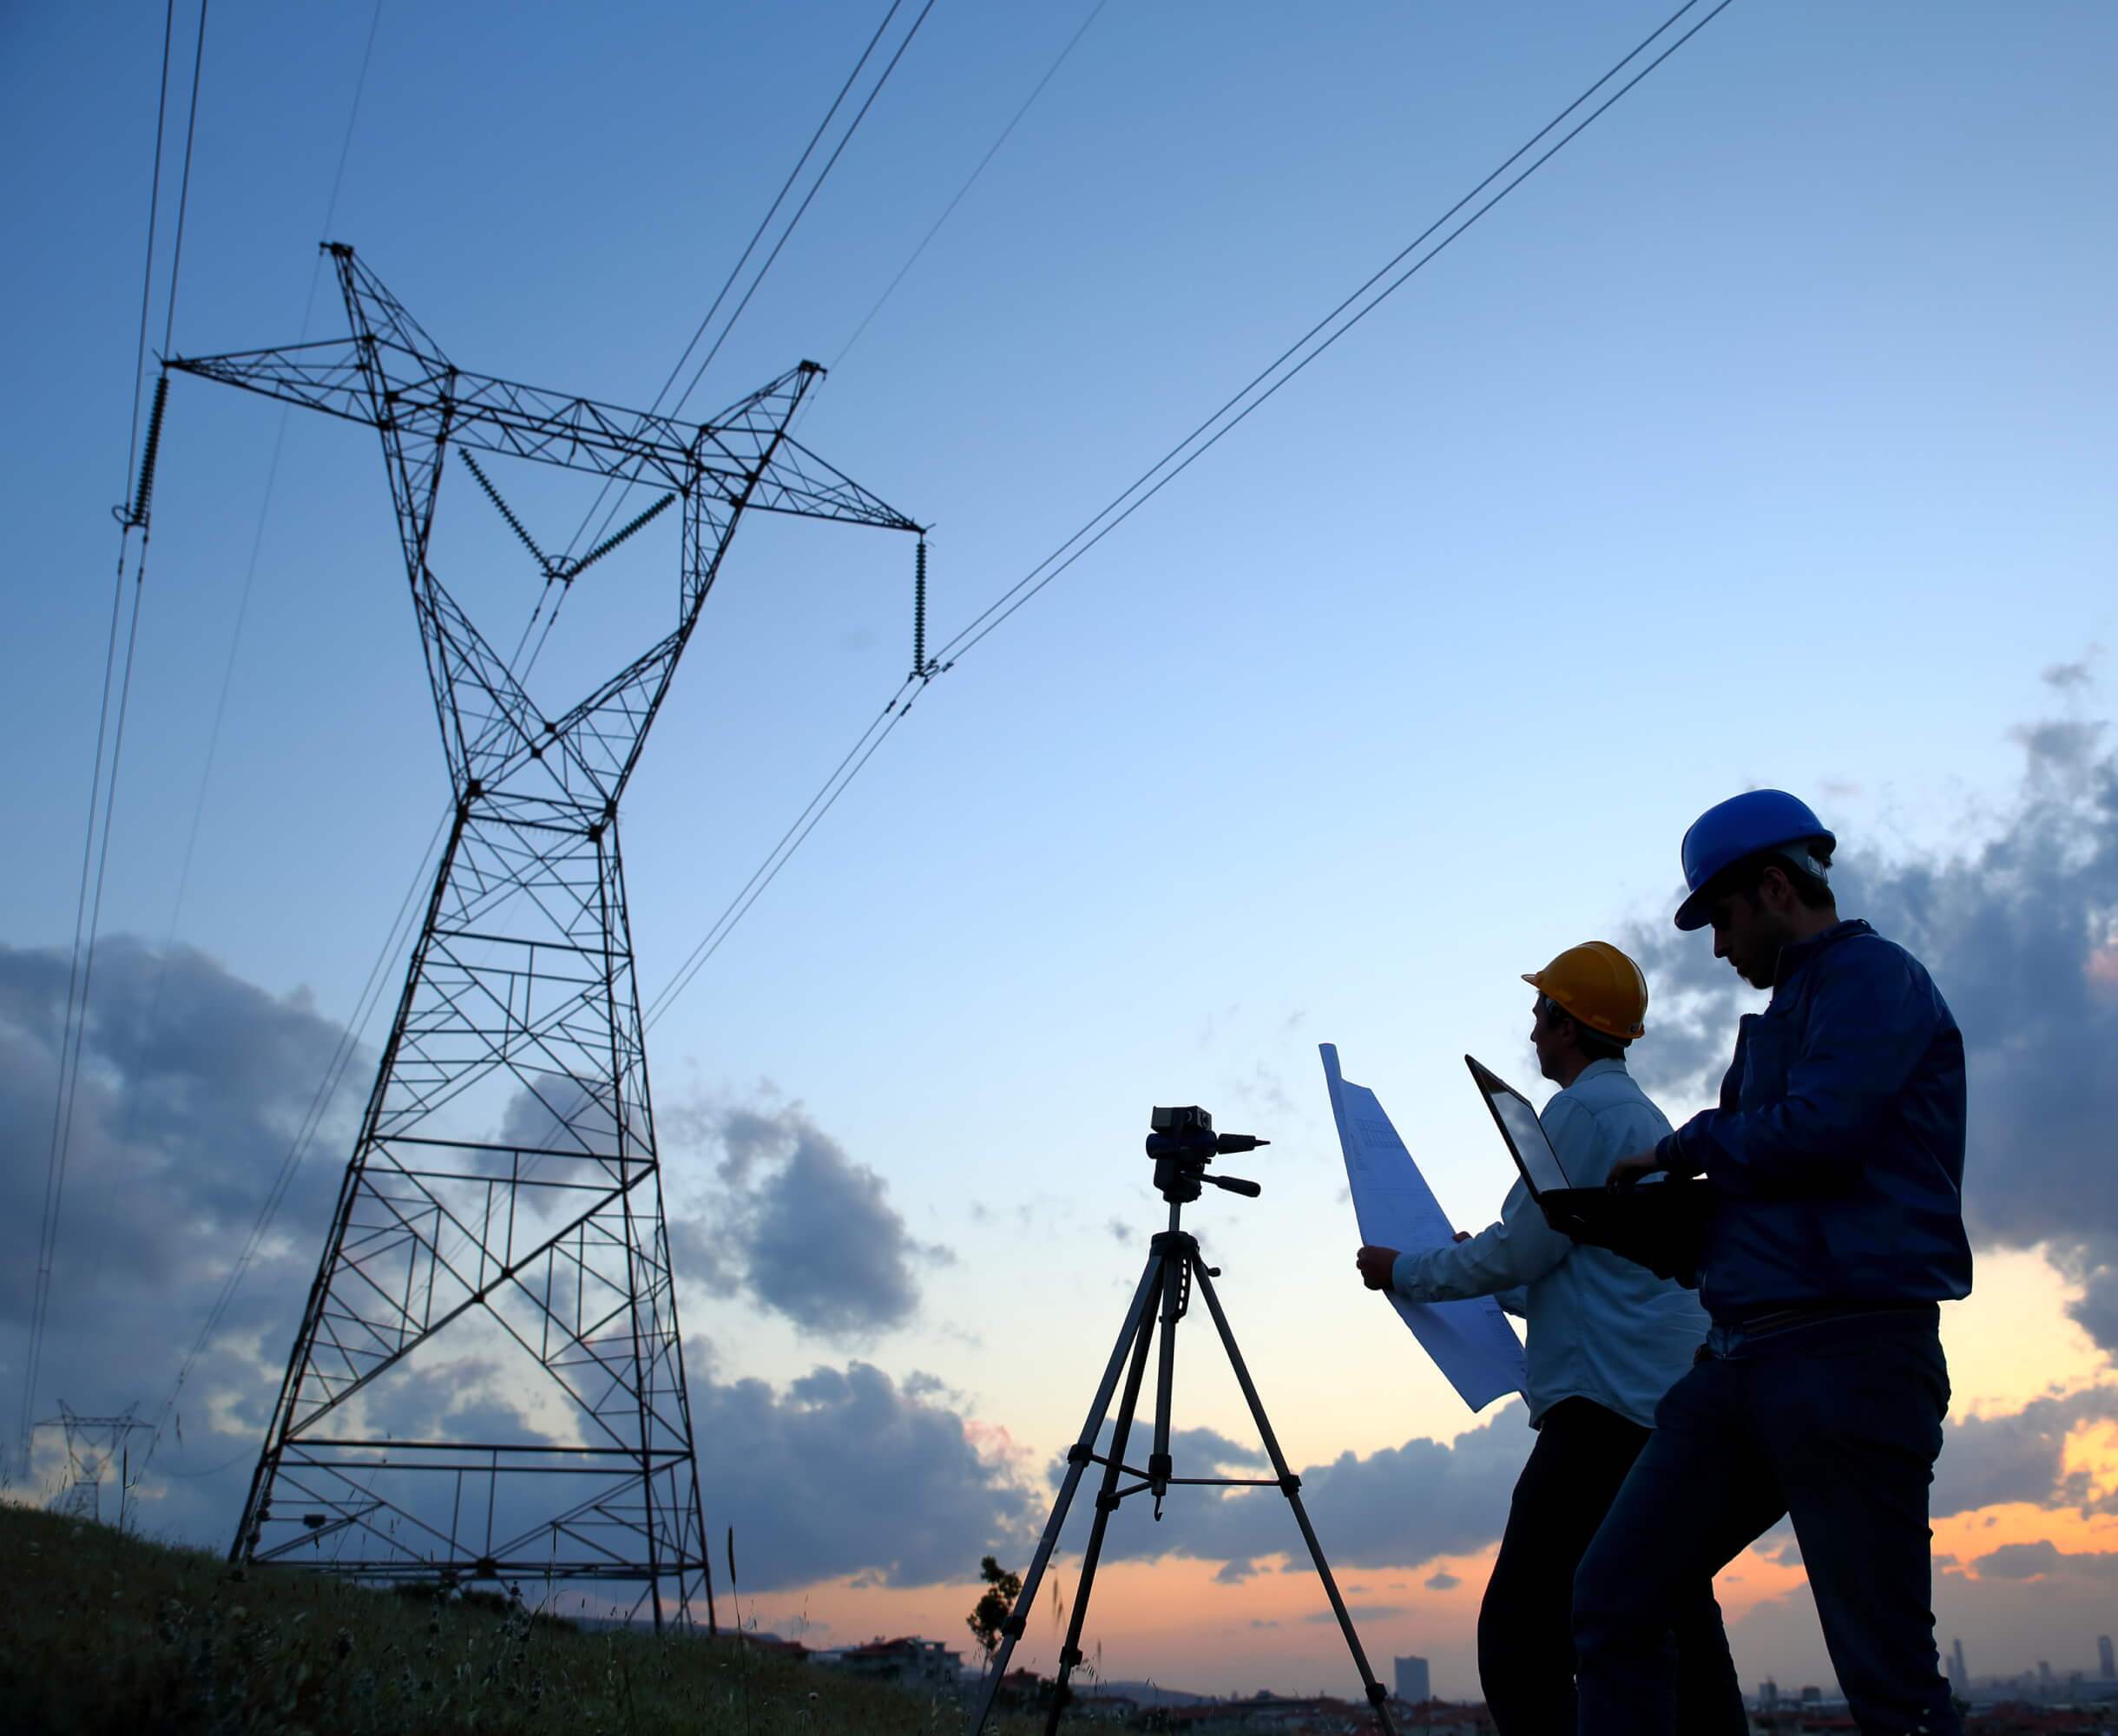 Two engineers reviewing energy infrastructure plans at dusk with a large electricity pylon in the background.